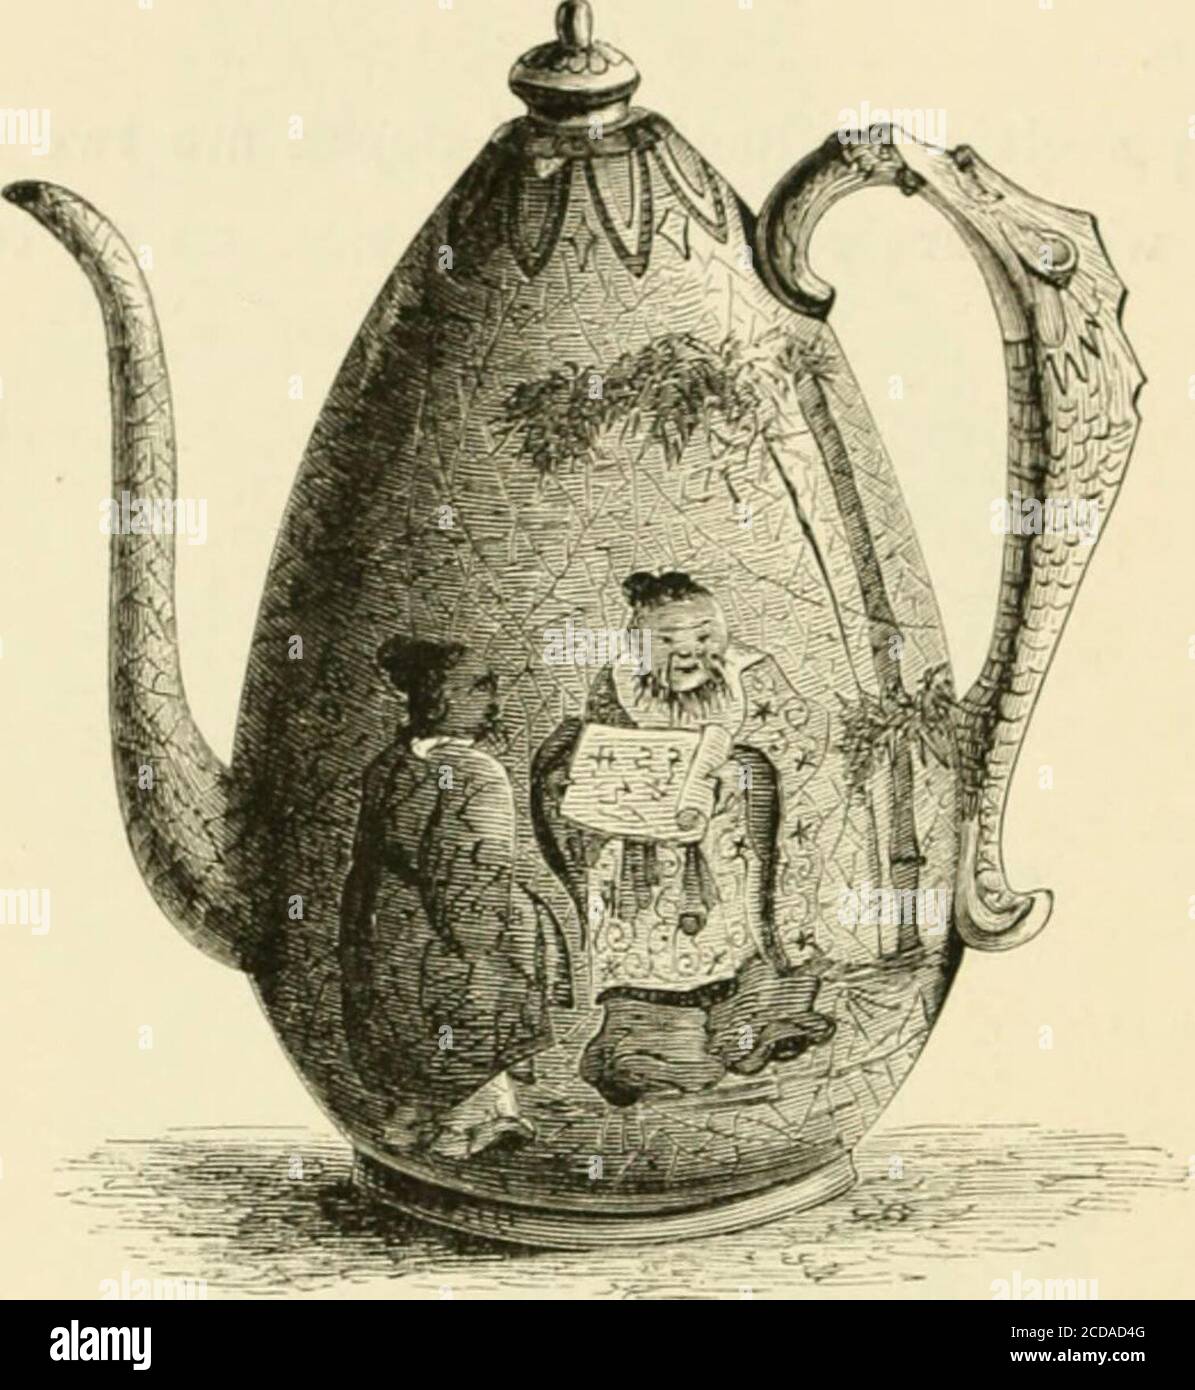 . Pottery and porcelain, from early times down to the Philadelphia exhibition of 1876 . Fio. Hi.—Example of Old SaUuma Ware. tion: the one is called Kaga Ware, the other Satsuma, fromthe districts where they are produced. Most of the Kaga ware broughtto ns is of a thick, heavy body, and colored with a dark sort of Indian-red, touched with lines of gilding. Some of the finer specimens, how- 224 POTTERY AND PORCELAIN. ever, like the vases shown in the recent work of Messrs. Audeslej andBowes, are in polychrome, and very beautiful. The Satsuma faience is made of a rich, creamy paste, and is thick Stock Photo